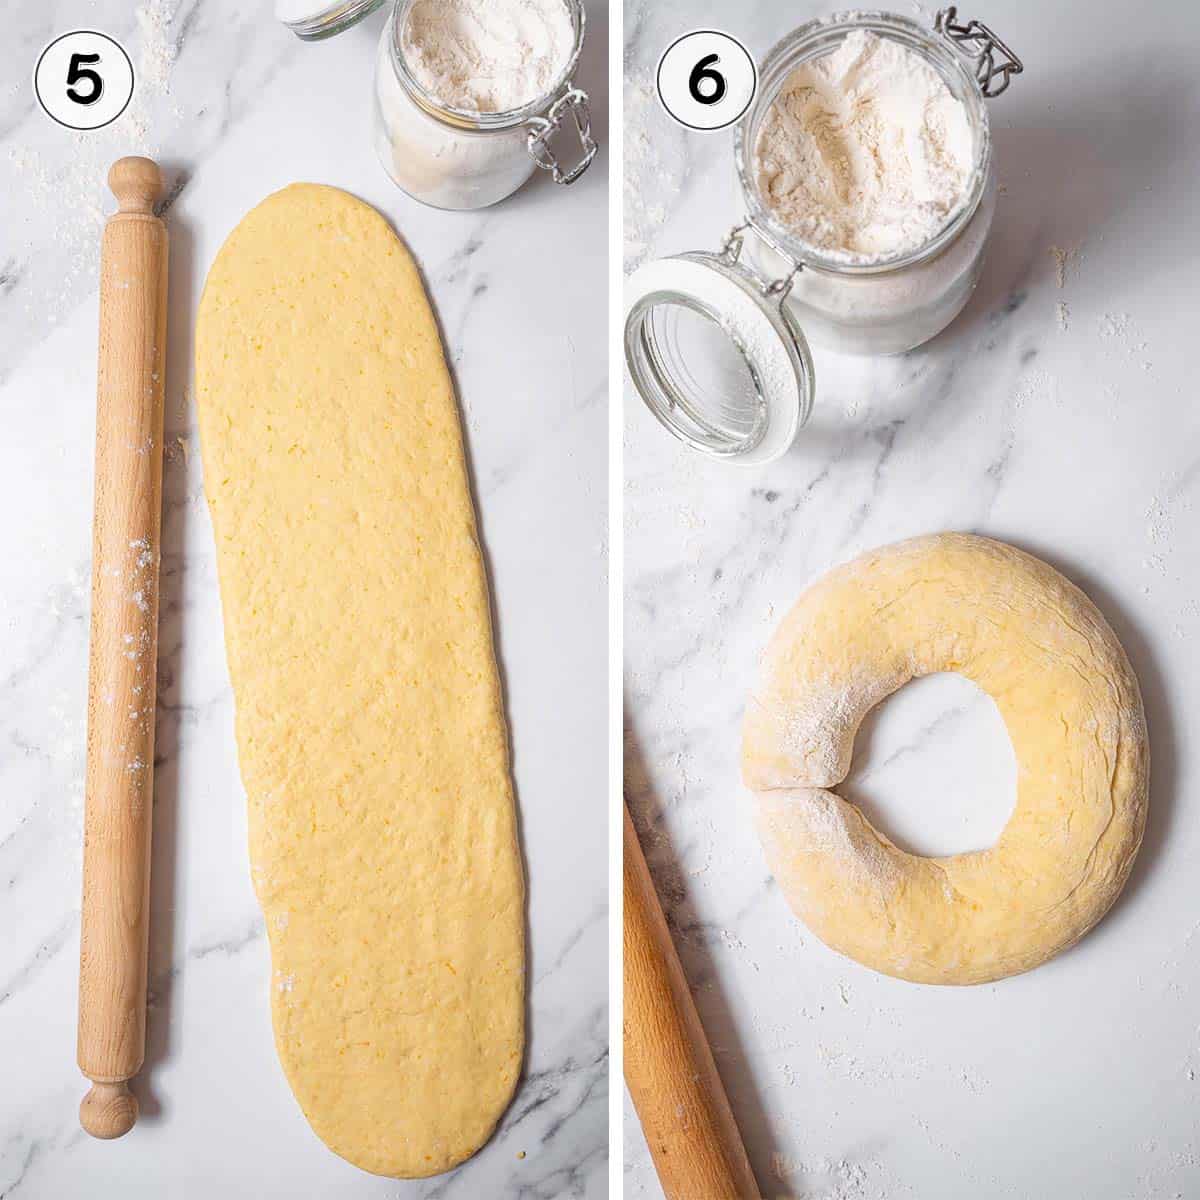 rolling out the dough and shaping it into a donut.